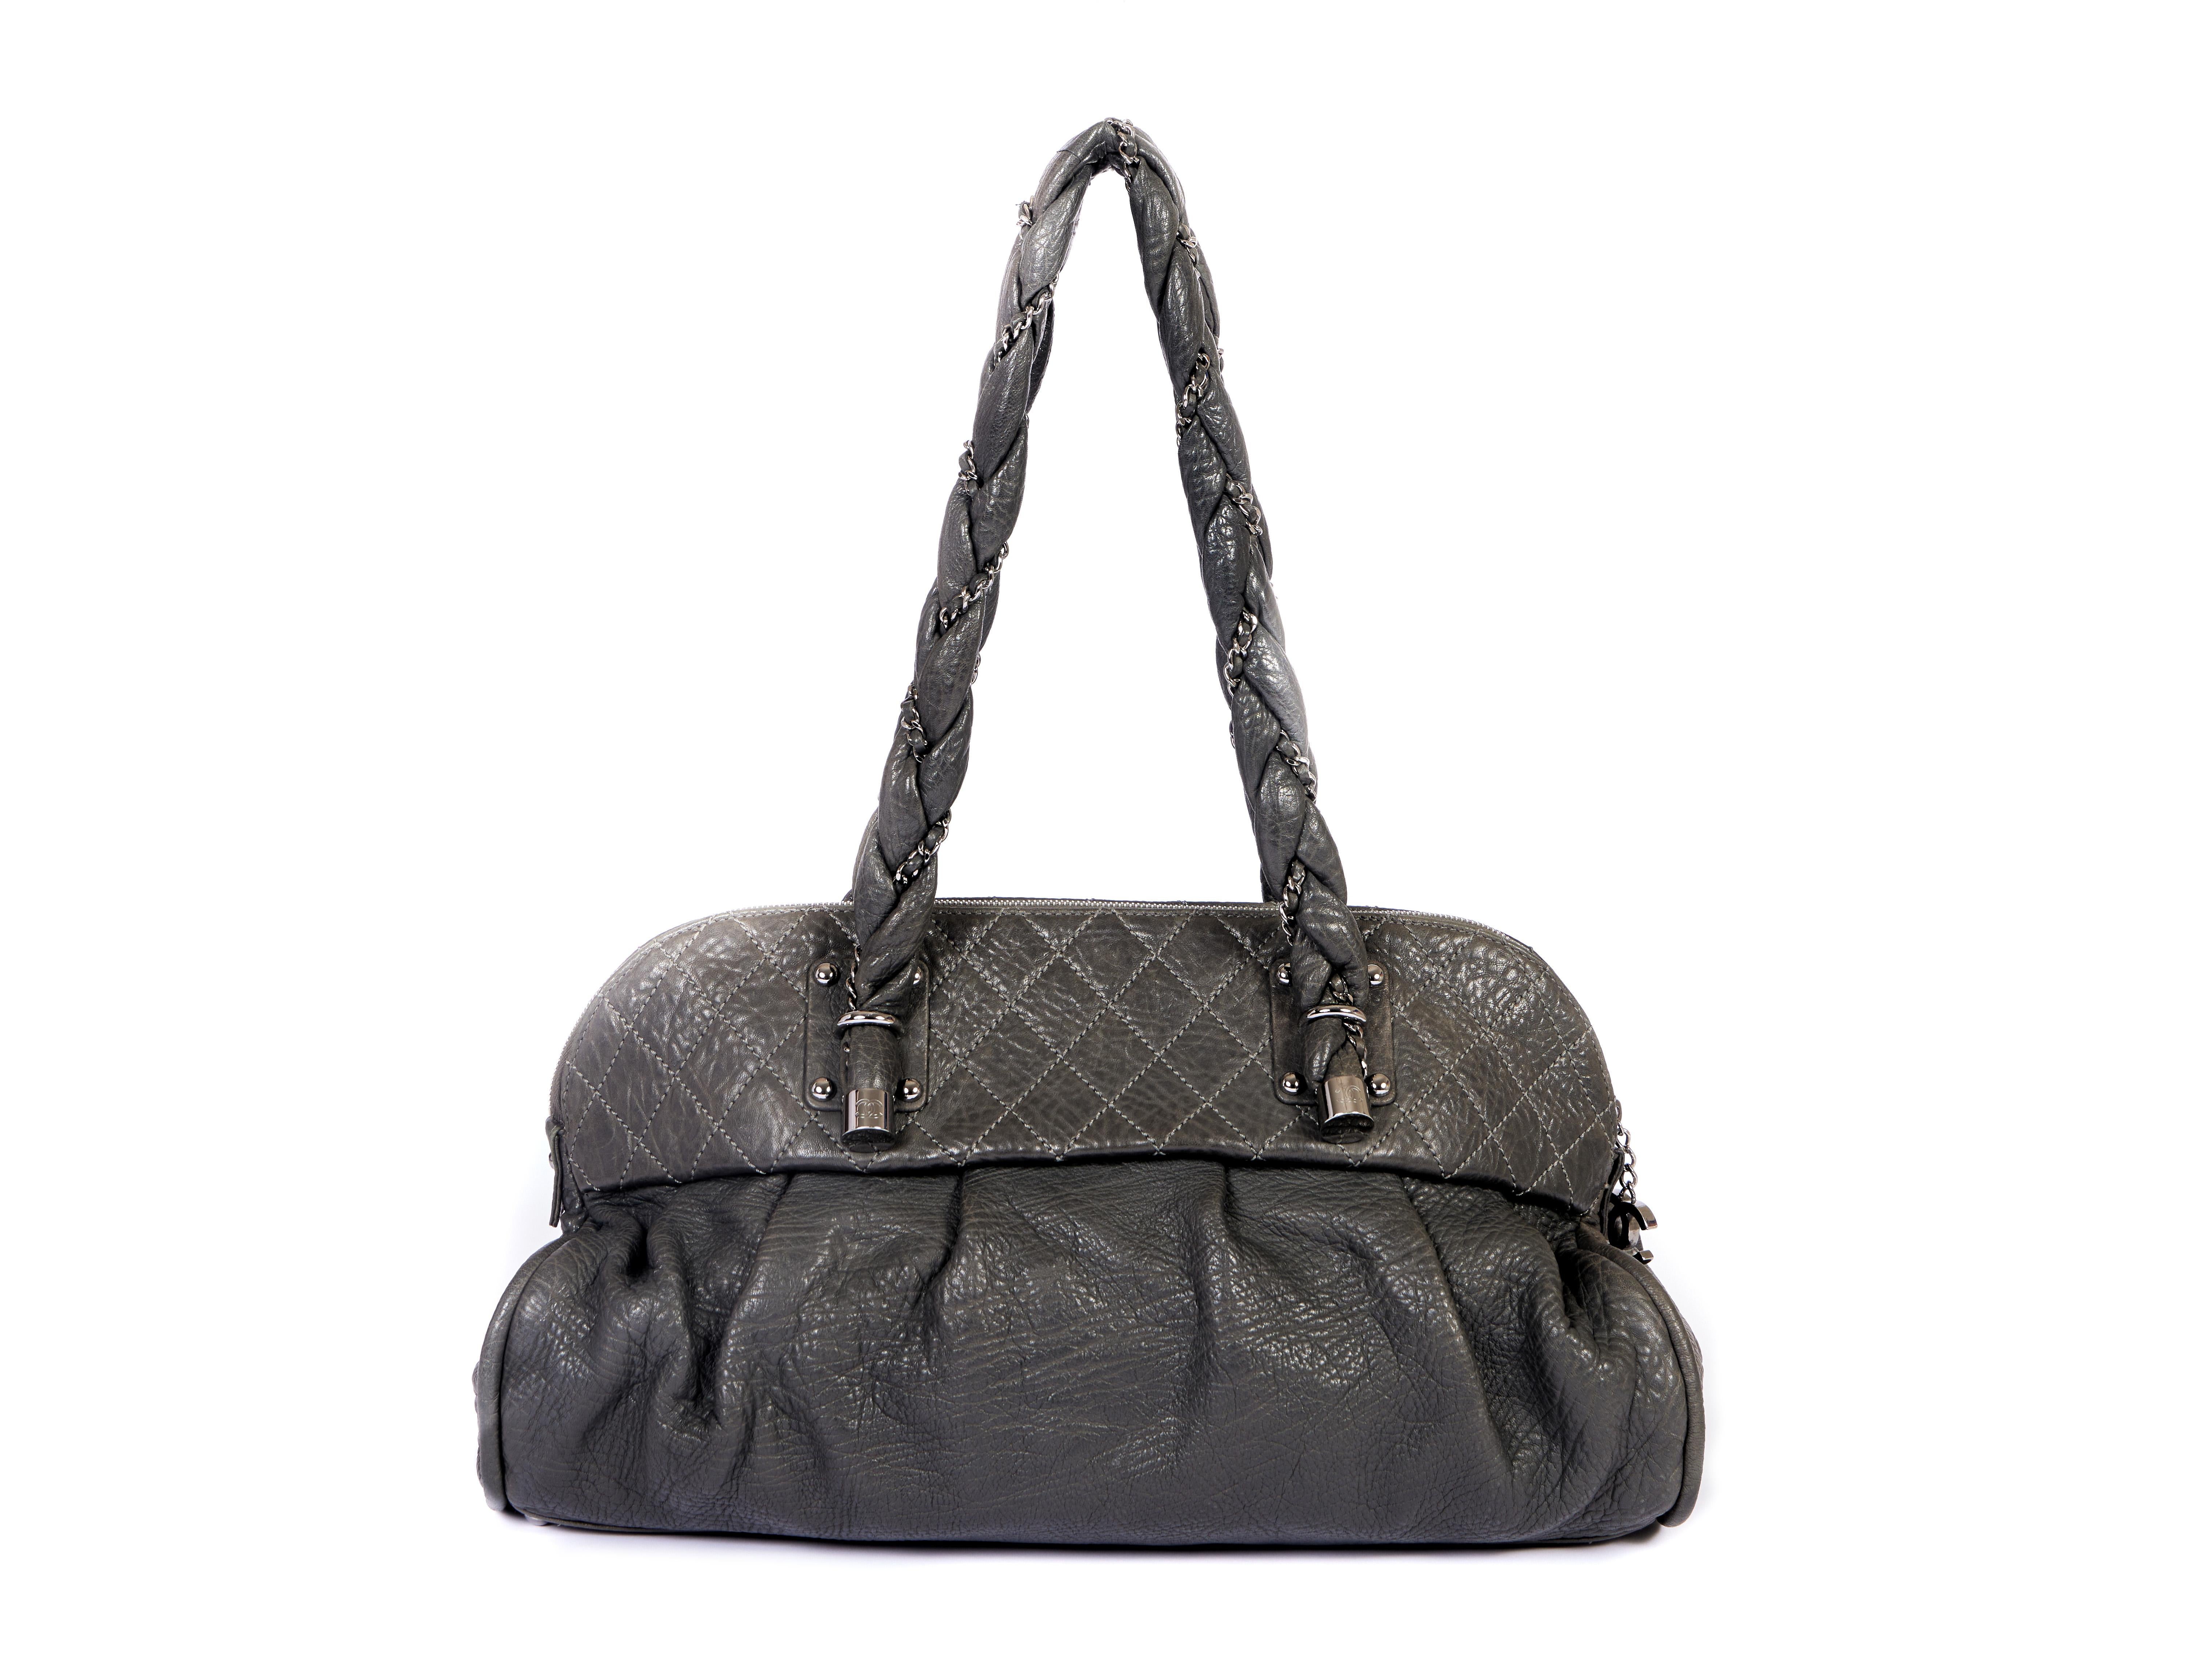 Chanel Gray Distressed Large Tote In Good Condition For Sale In West Hollywood, CA